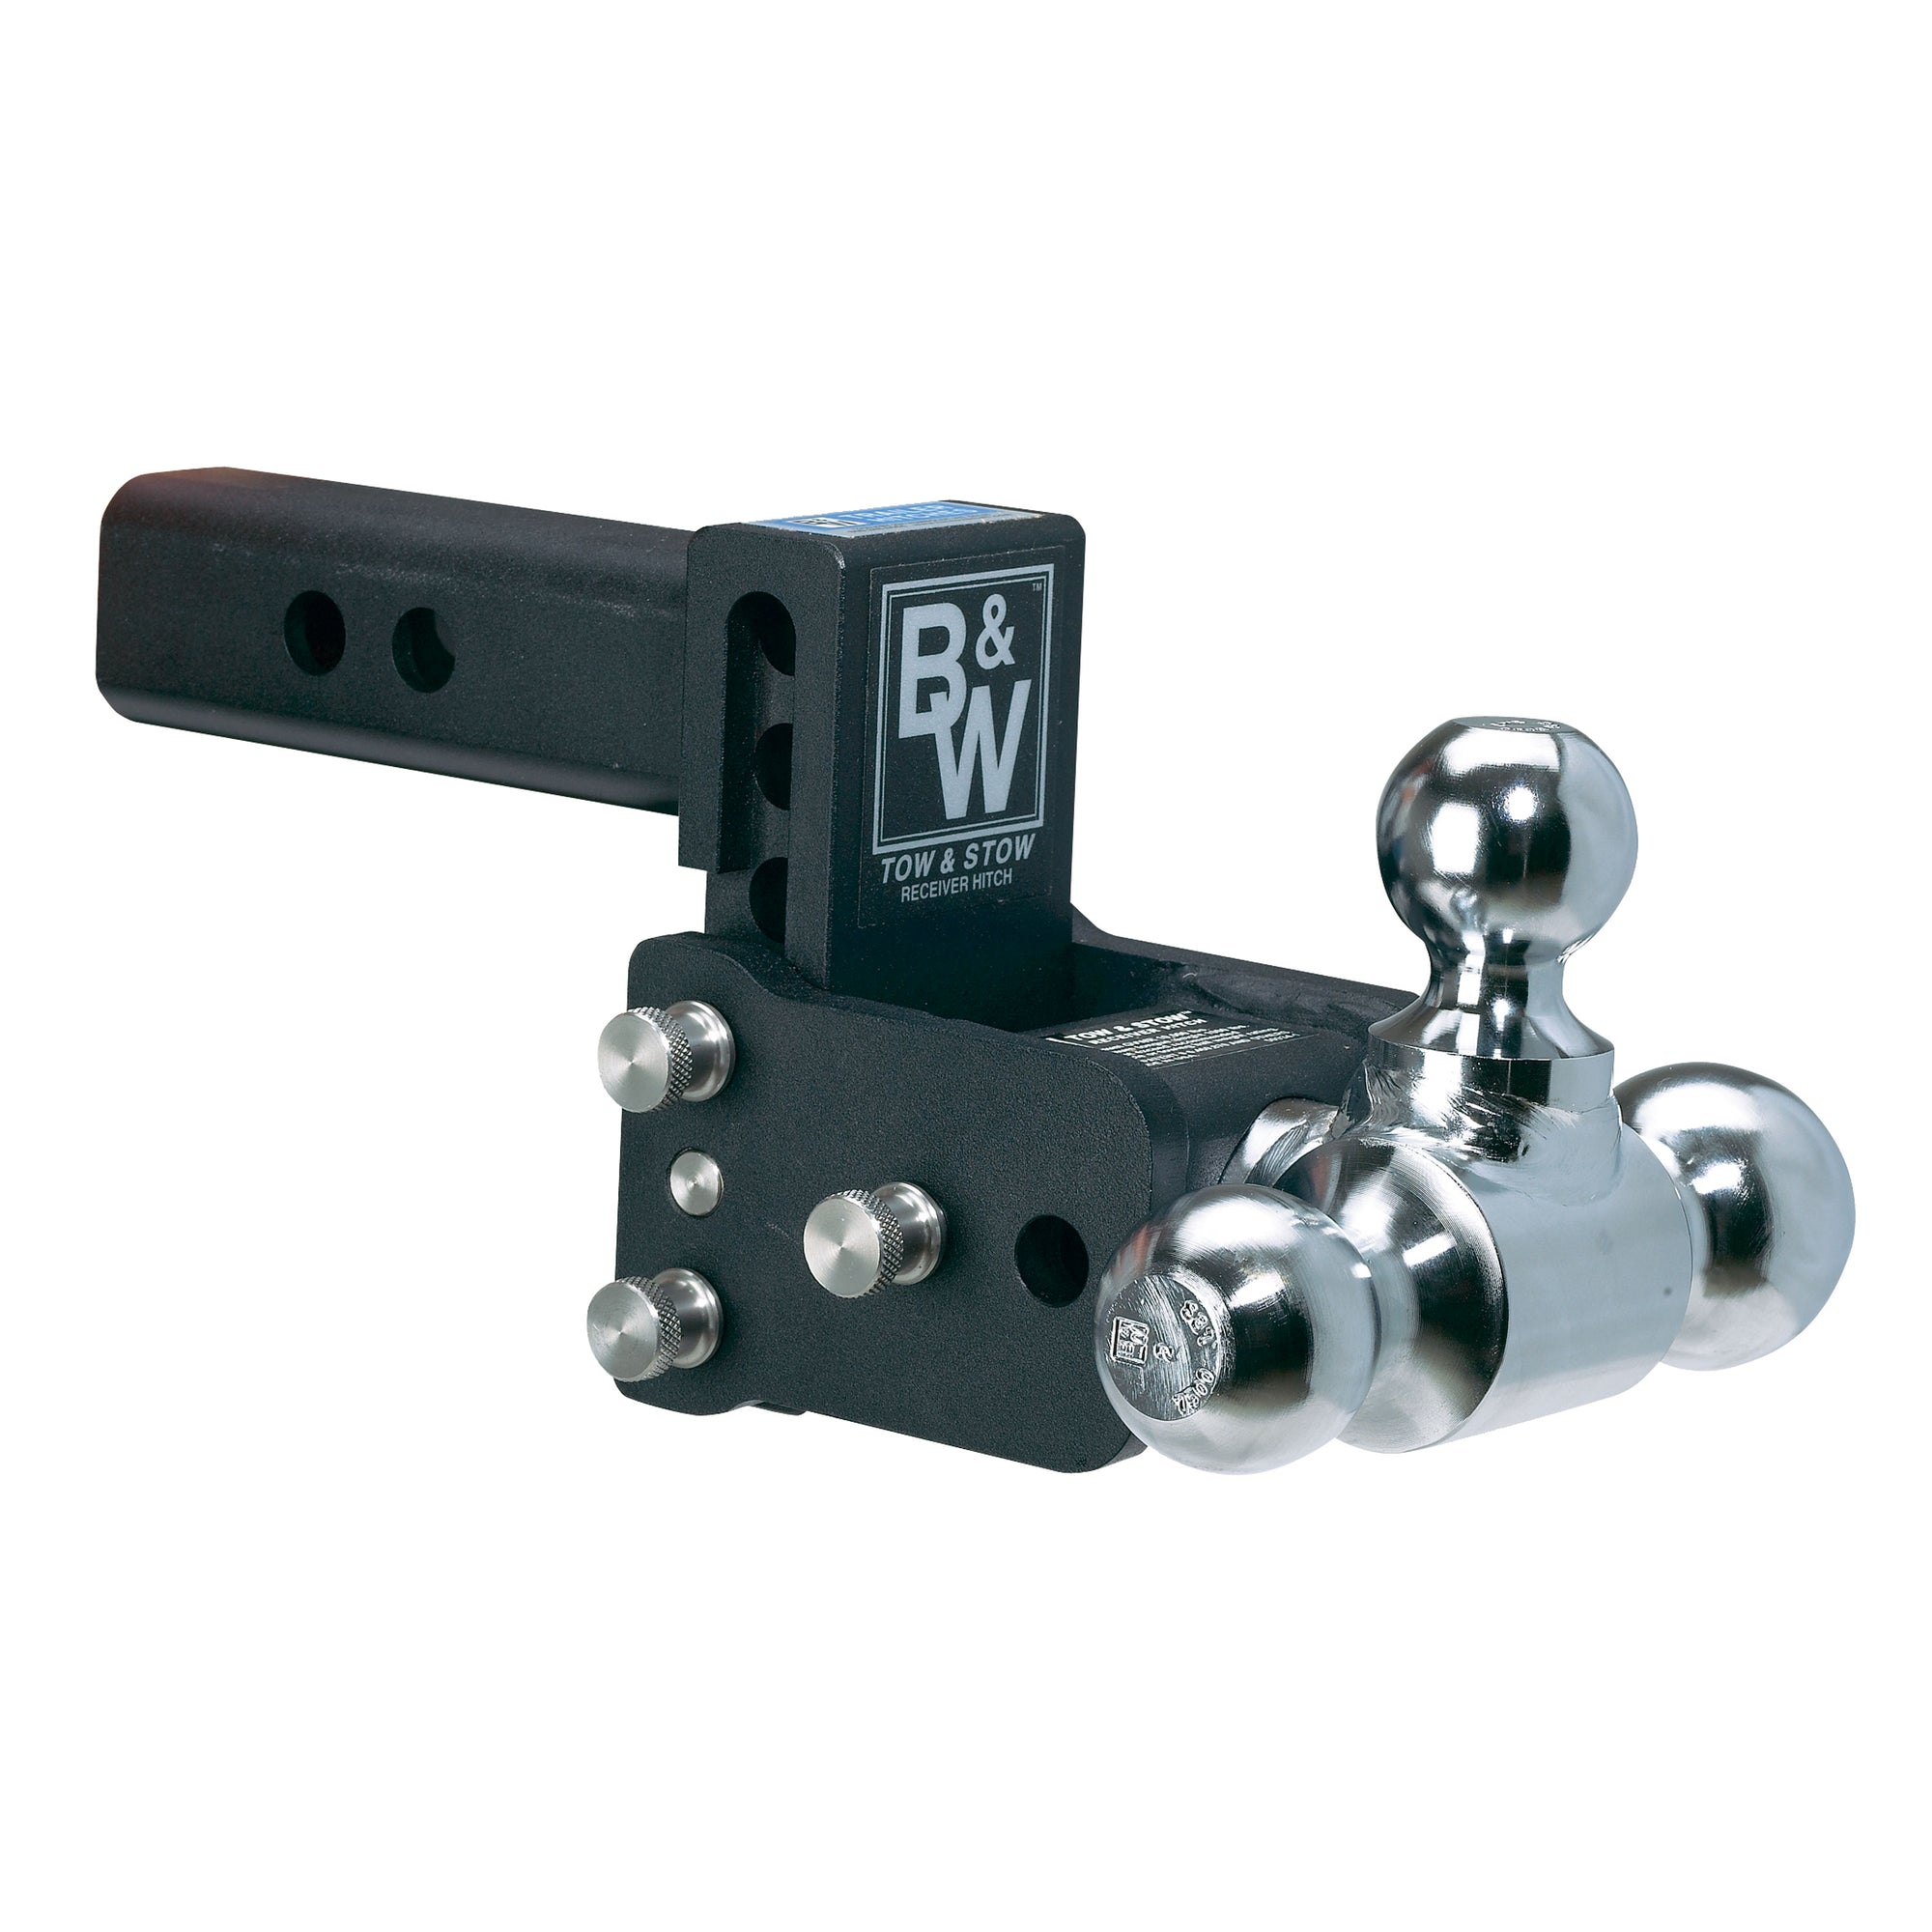 B&W Trailer Hitches TS10049B Tow and Stow Adjustable Ball Mount - 1-7/8", 2" & 2-5/16" Ball, 7" Drop, 7.5" Rise, Black